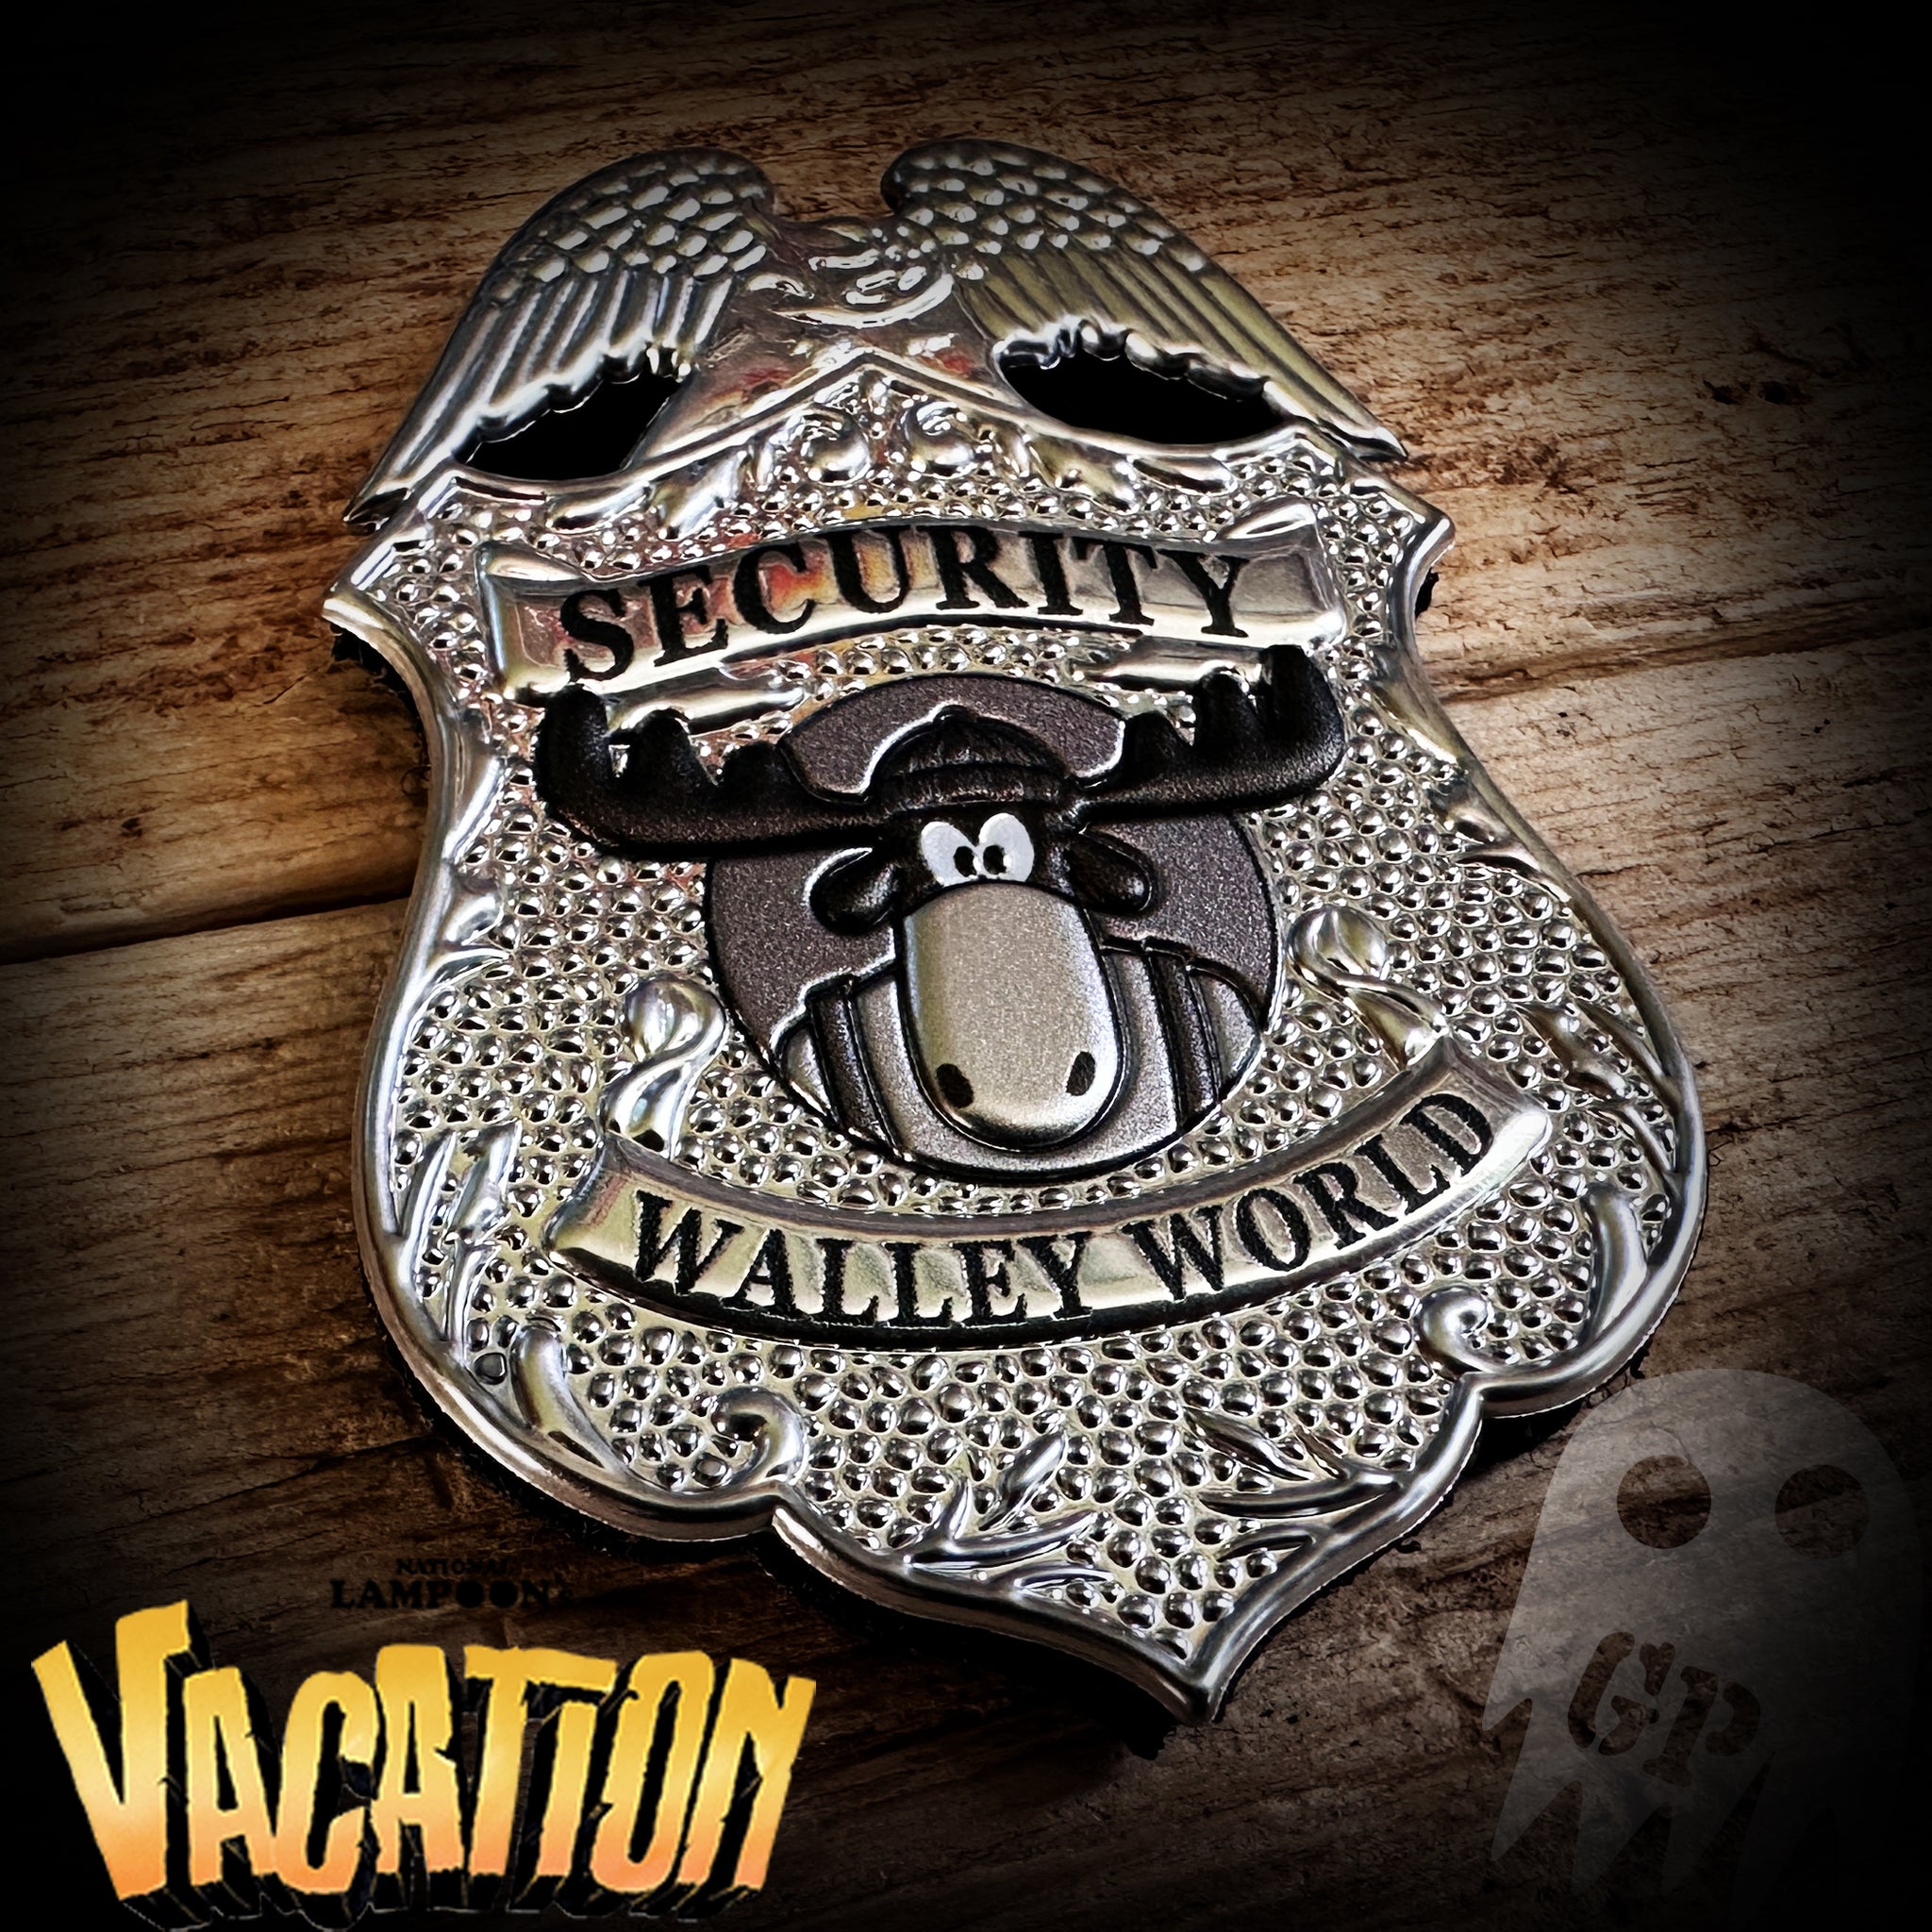 BADGE - Walley World Security Badge - National Lampoon's Vacation